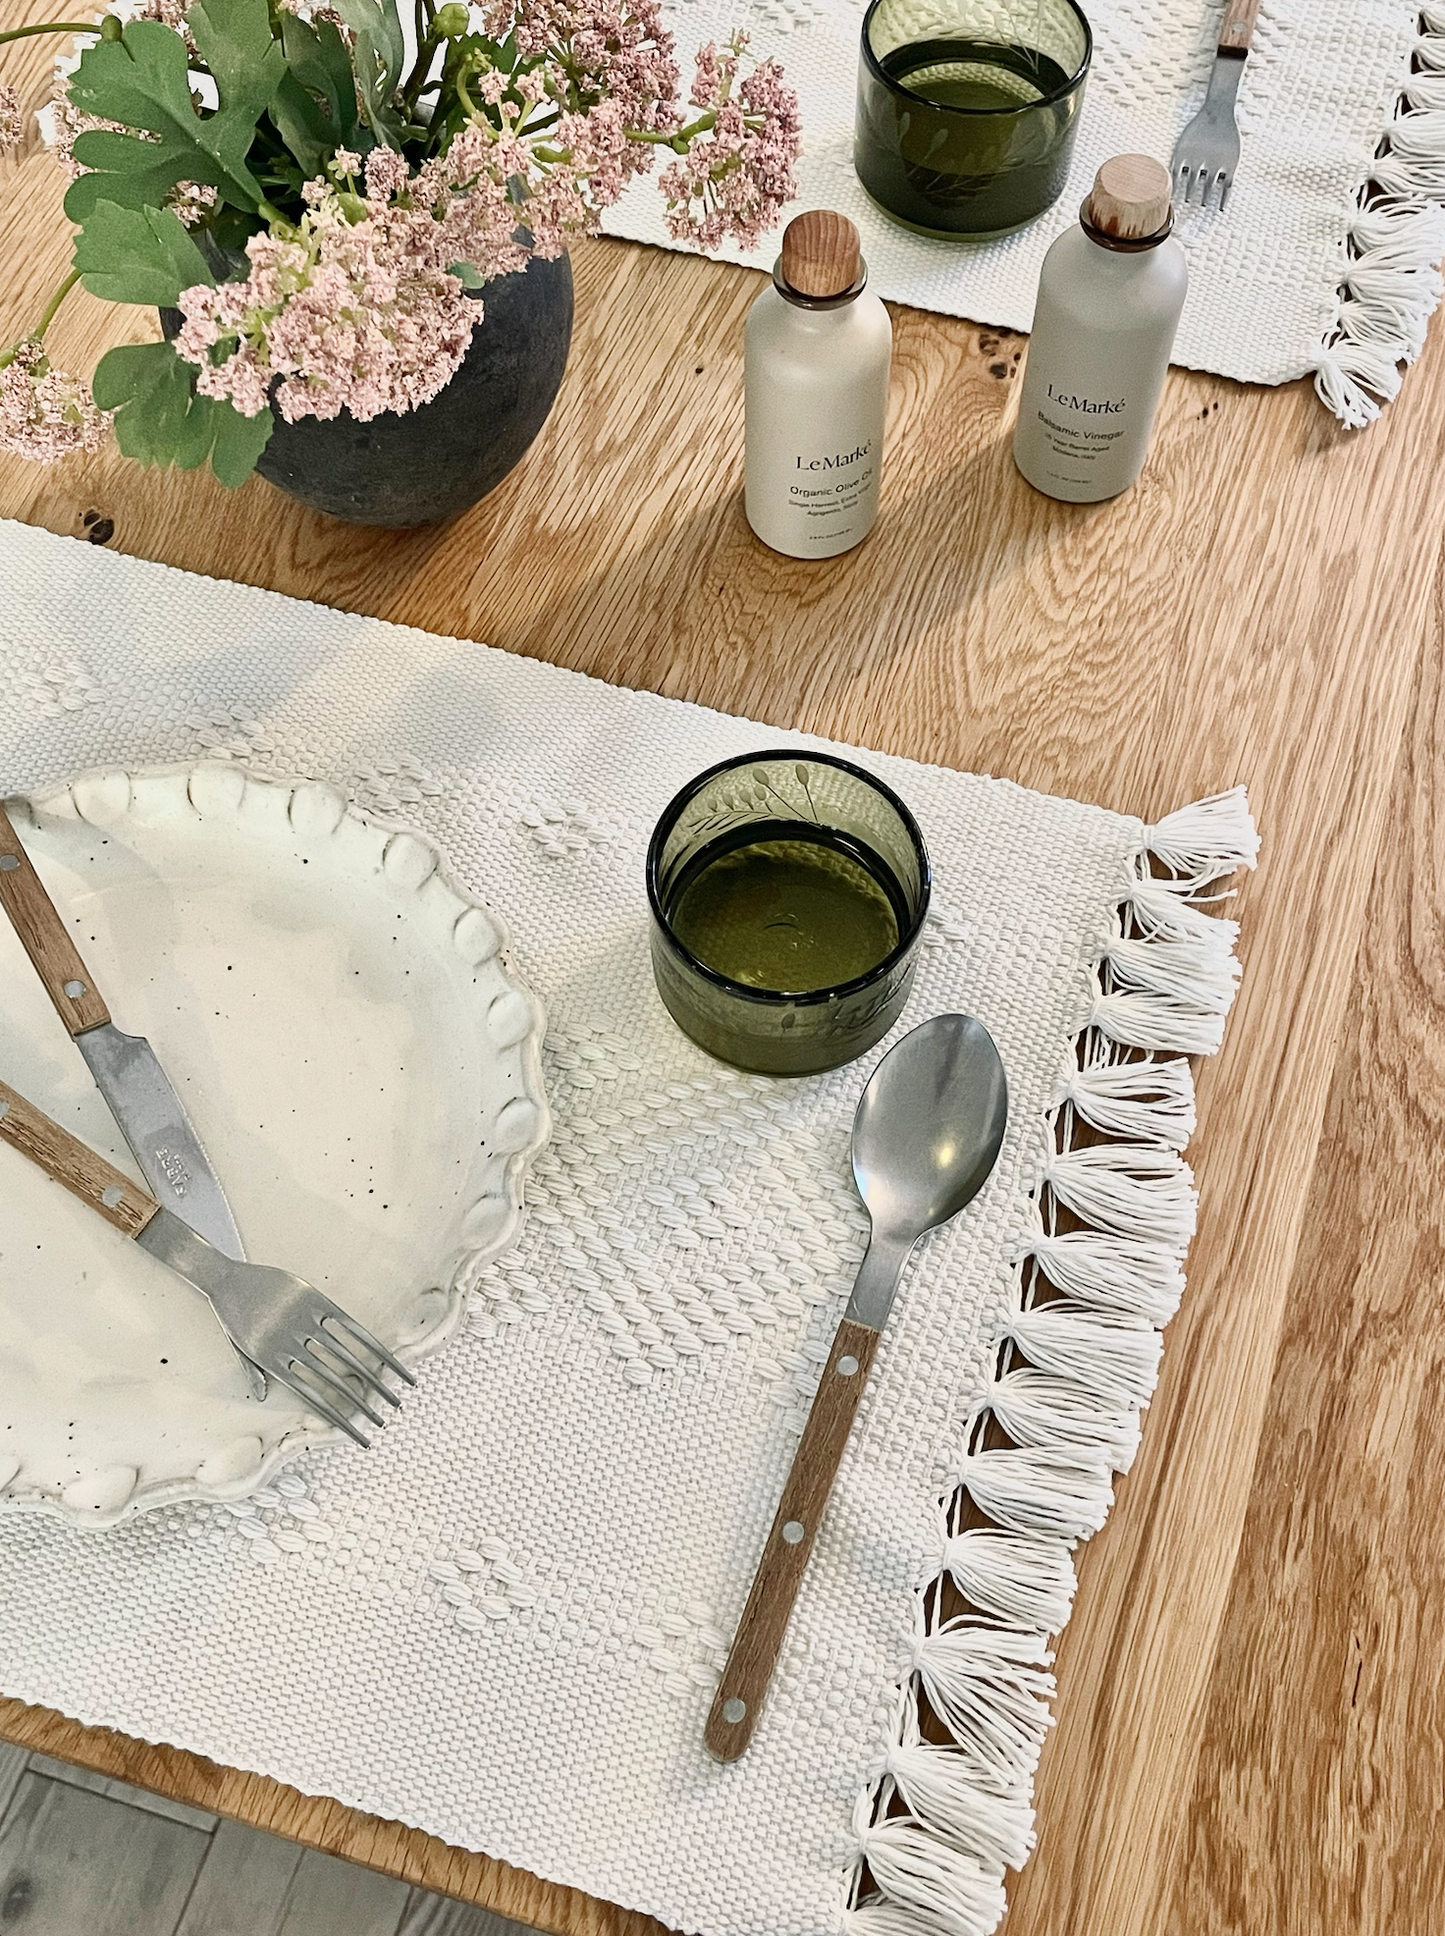 Oaxaca Handwoven Placemat, Off-white